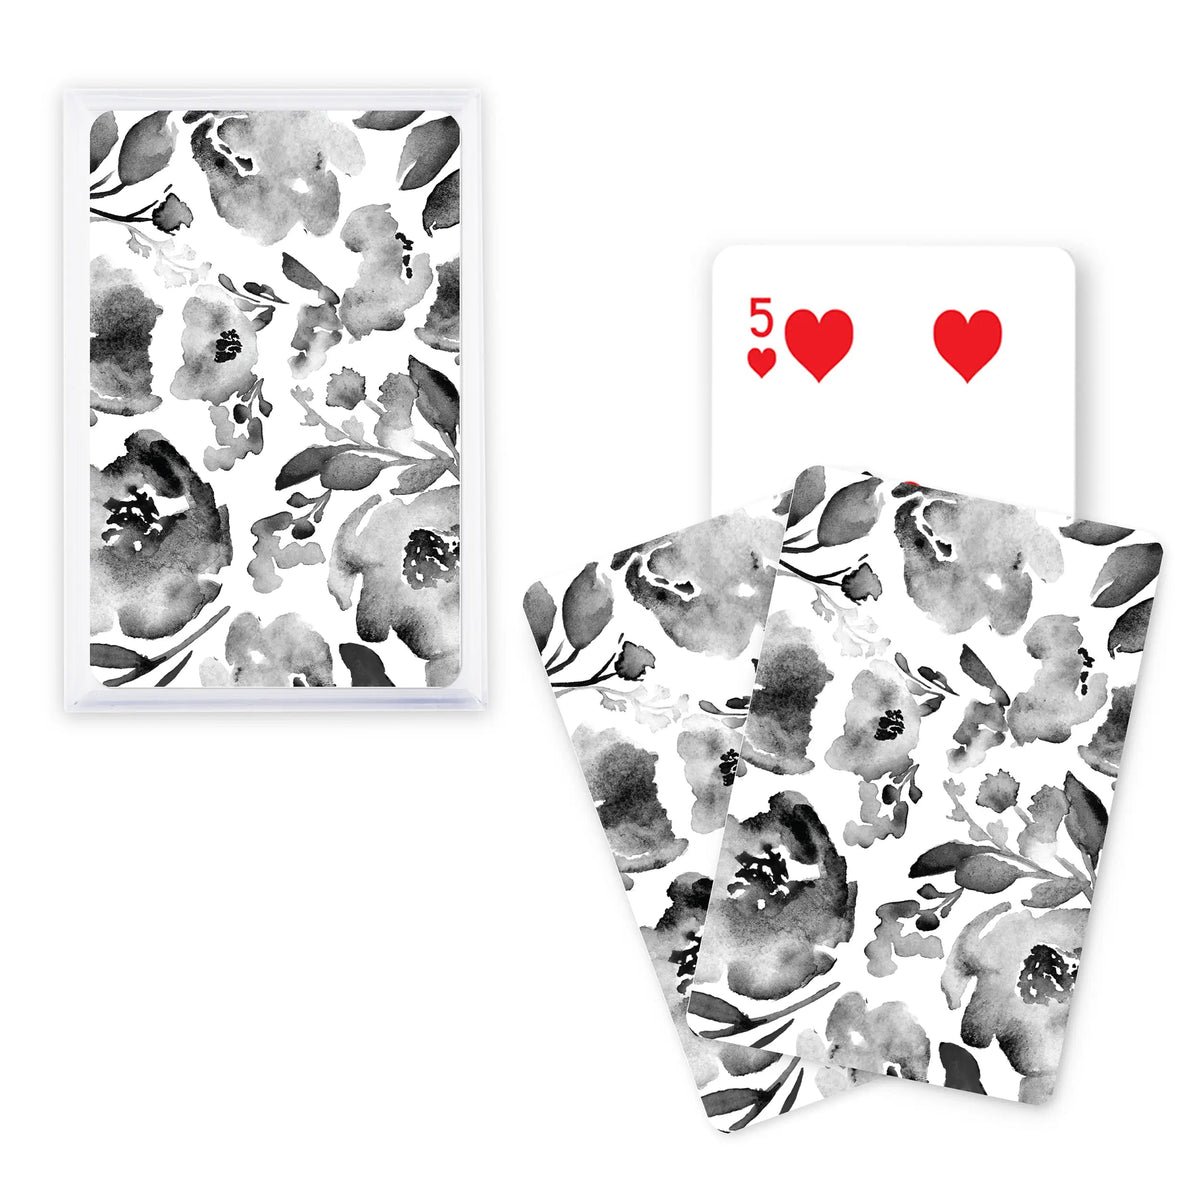 Black & White Bloom Floral Playing Cards - Forever Wedding Favors